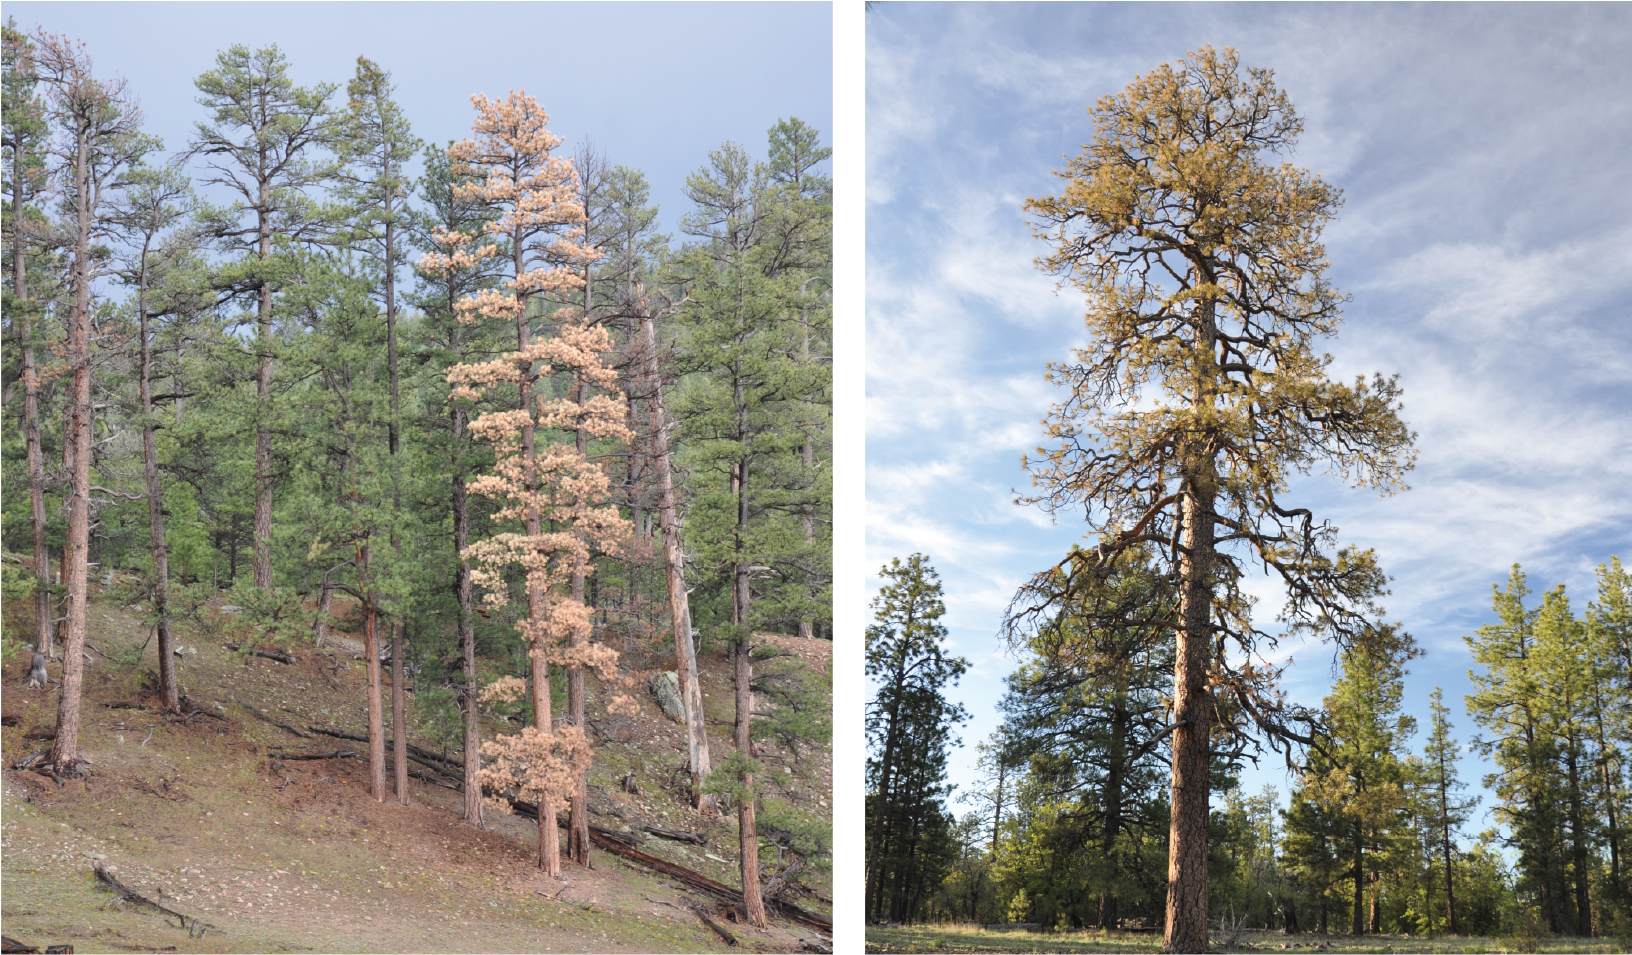 Examples of recent tree mortality. At left, old Ponderosa pines in the Lukachukai area of the Chuska Mountains. Four of the trees shown here died 2006-2016. The red-colored tree at center died in 2015. At right, a 400-year old ponderosa pine on the Defiance Plateau. We dated the tree's germination to 1613, and it died in 2015. The following year it was cut by local tribal members for fuelwood. Photo credit: C. Guiterman.